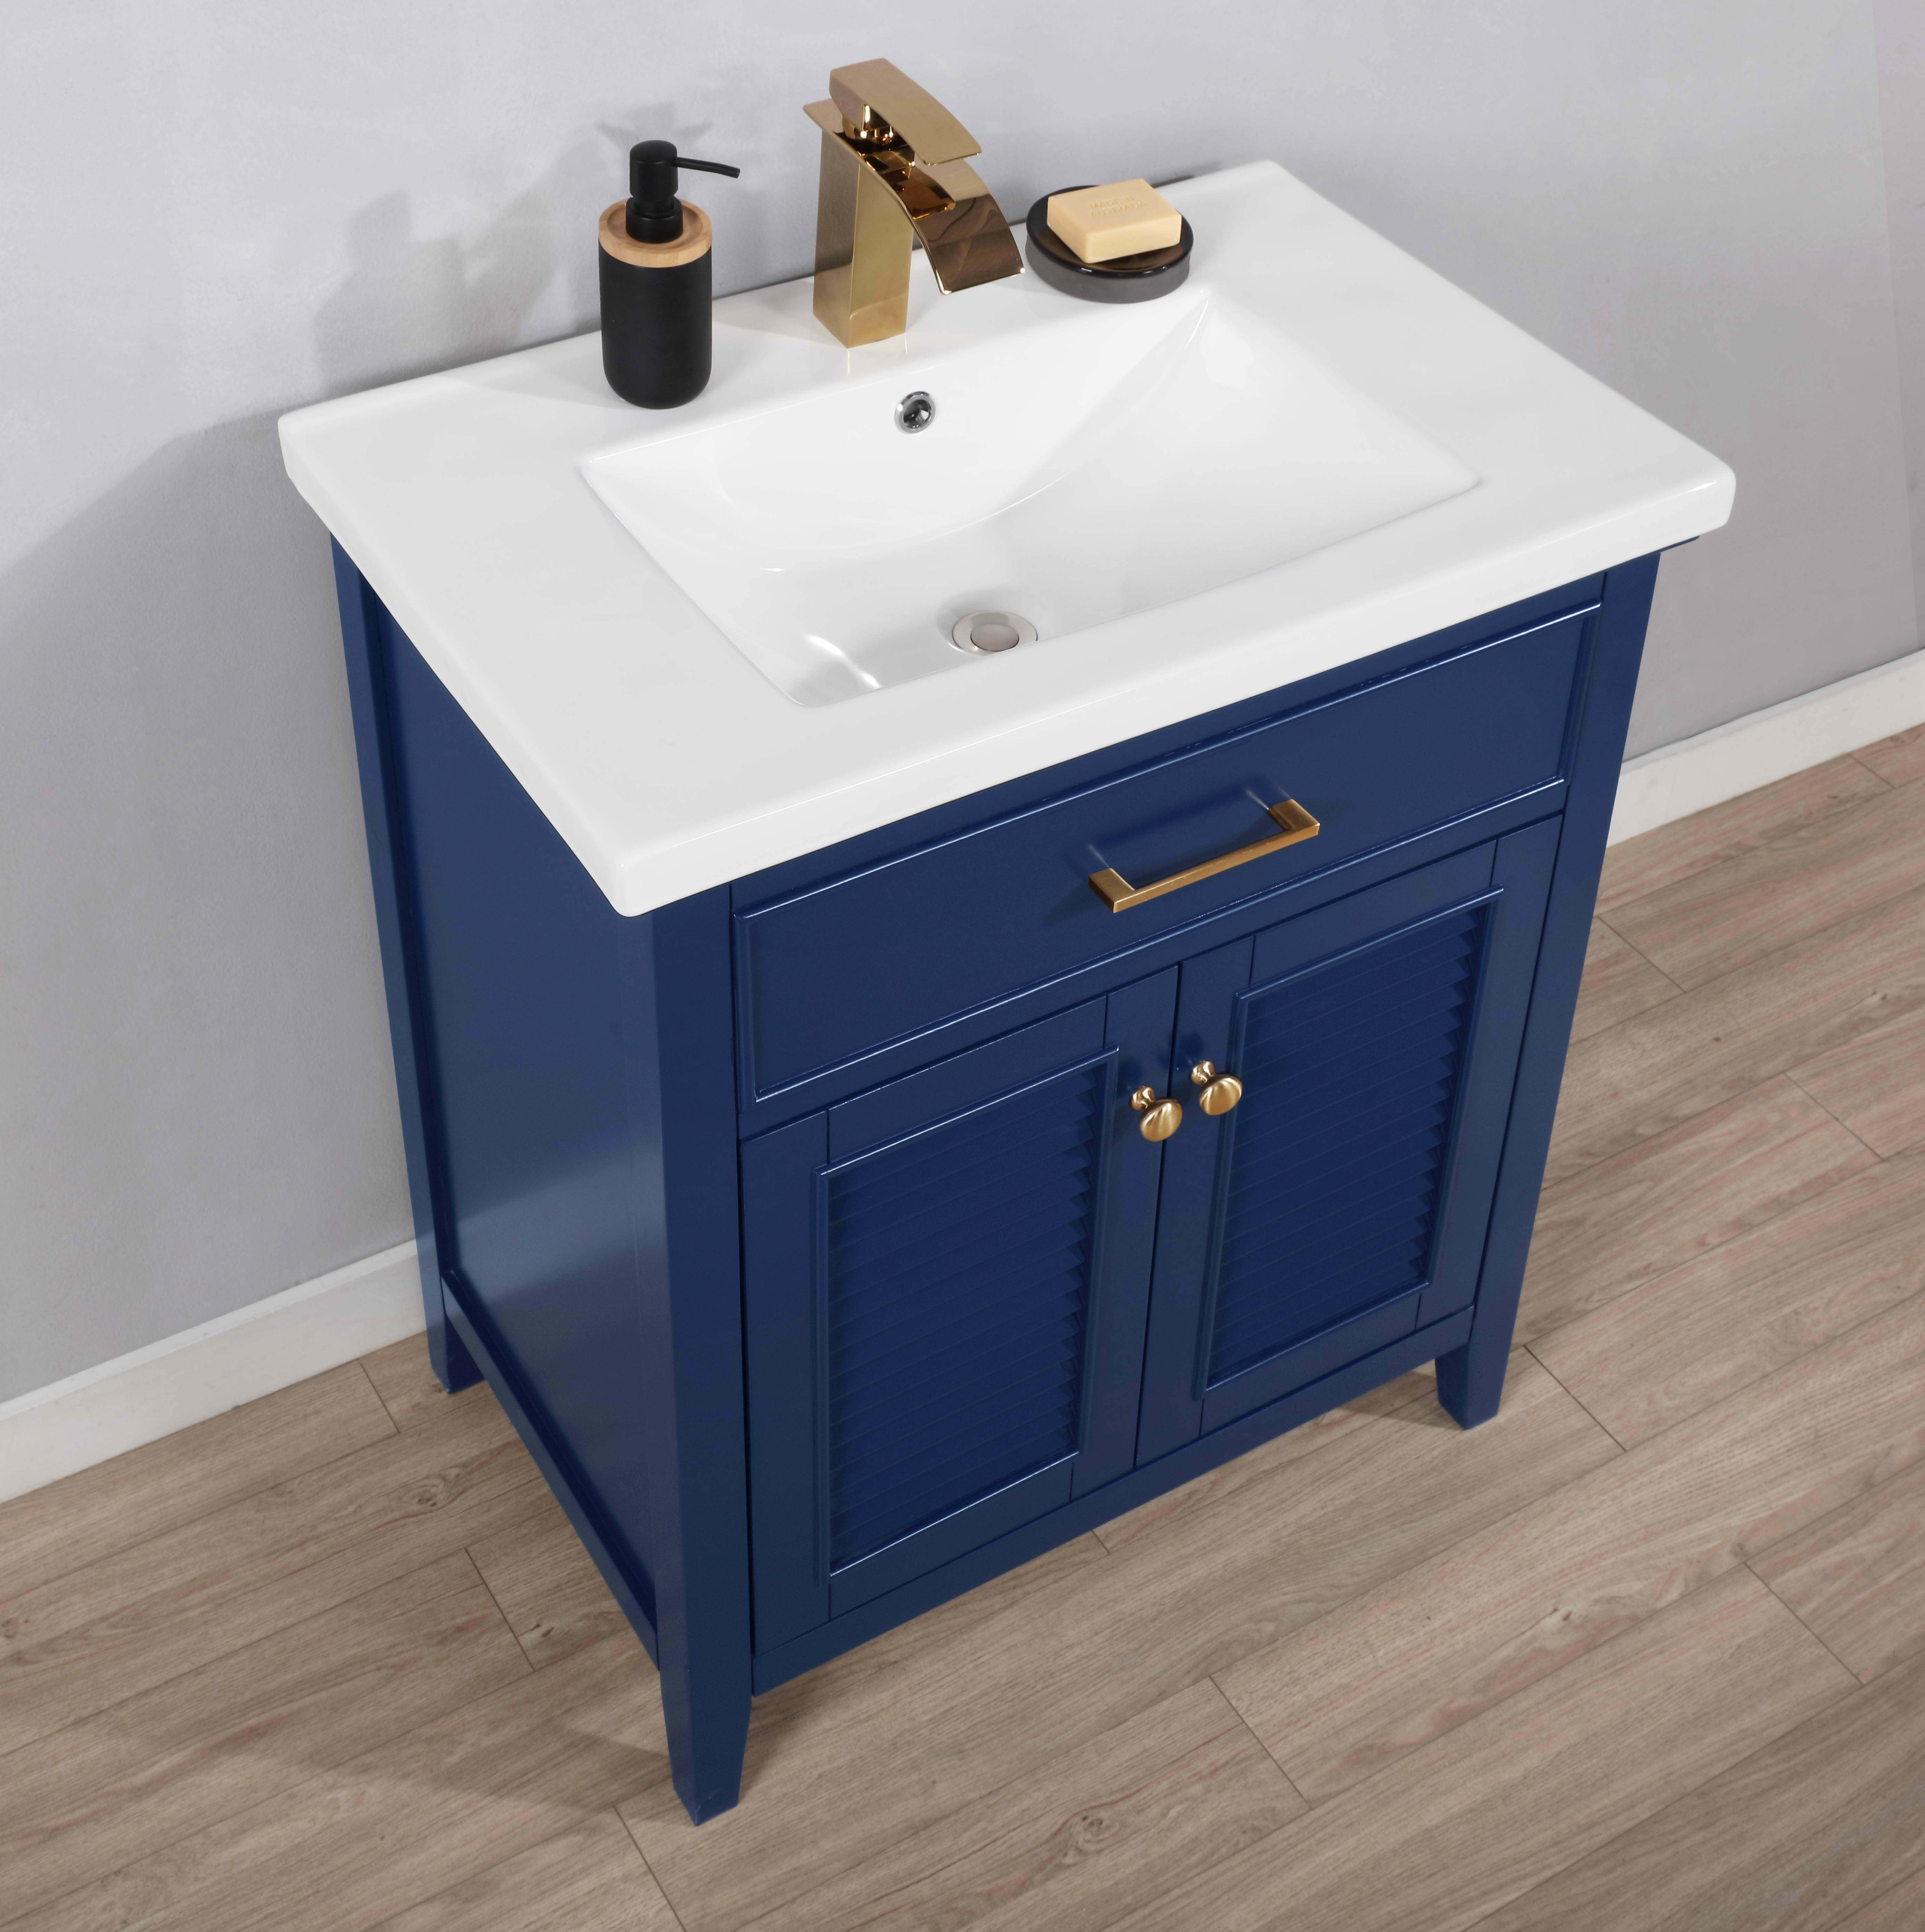 Transitional 30" Single Sink Bathroom Vanity with Porcelain Integrated